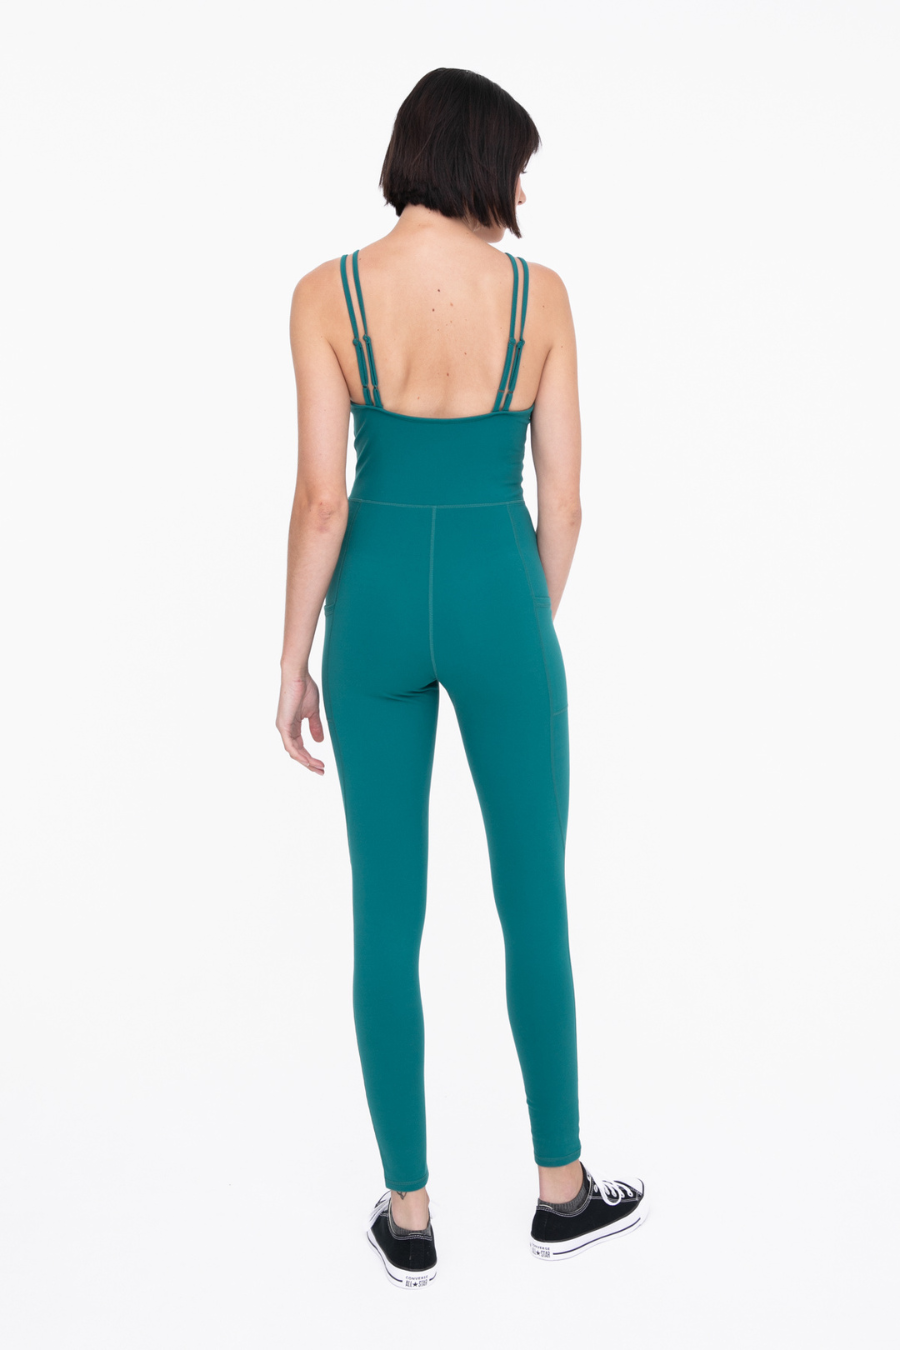 back full length view of the camilla sleeveless catsuit in the color teal 